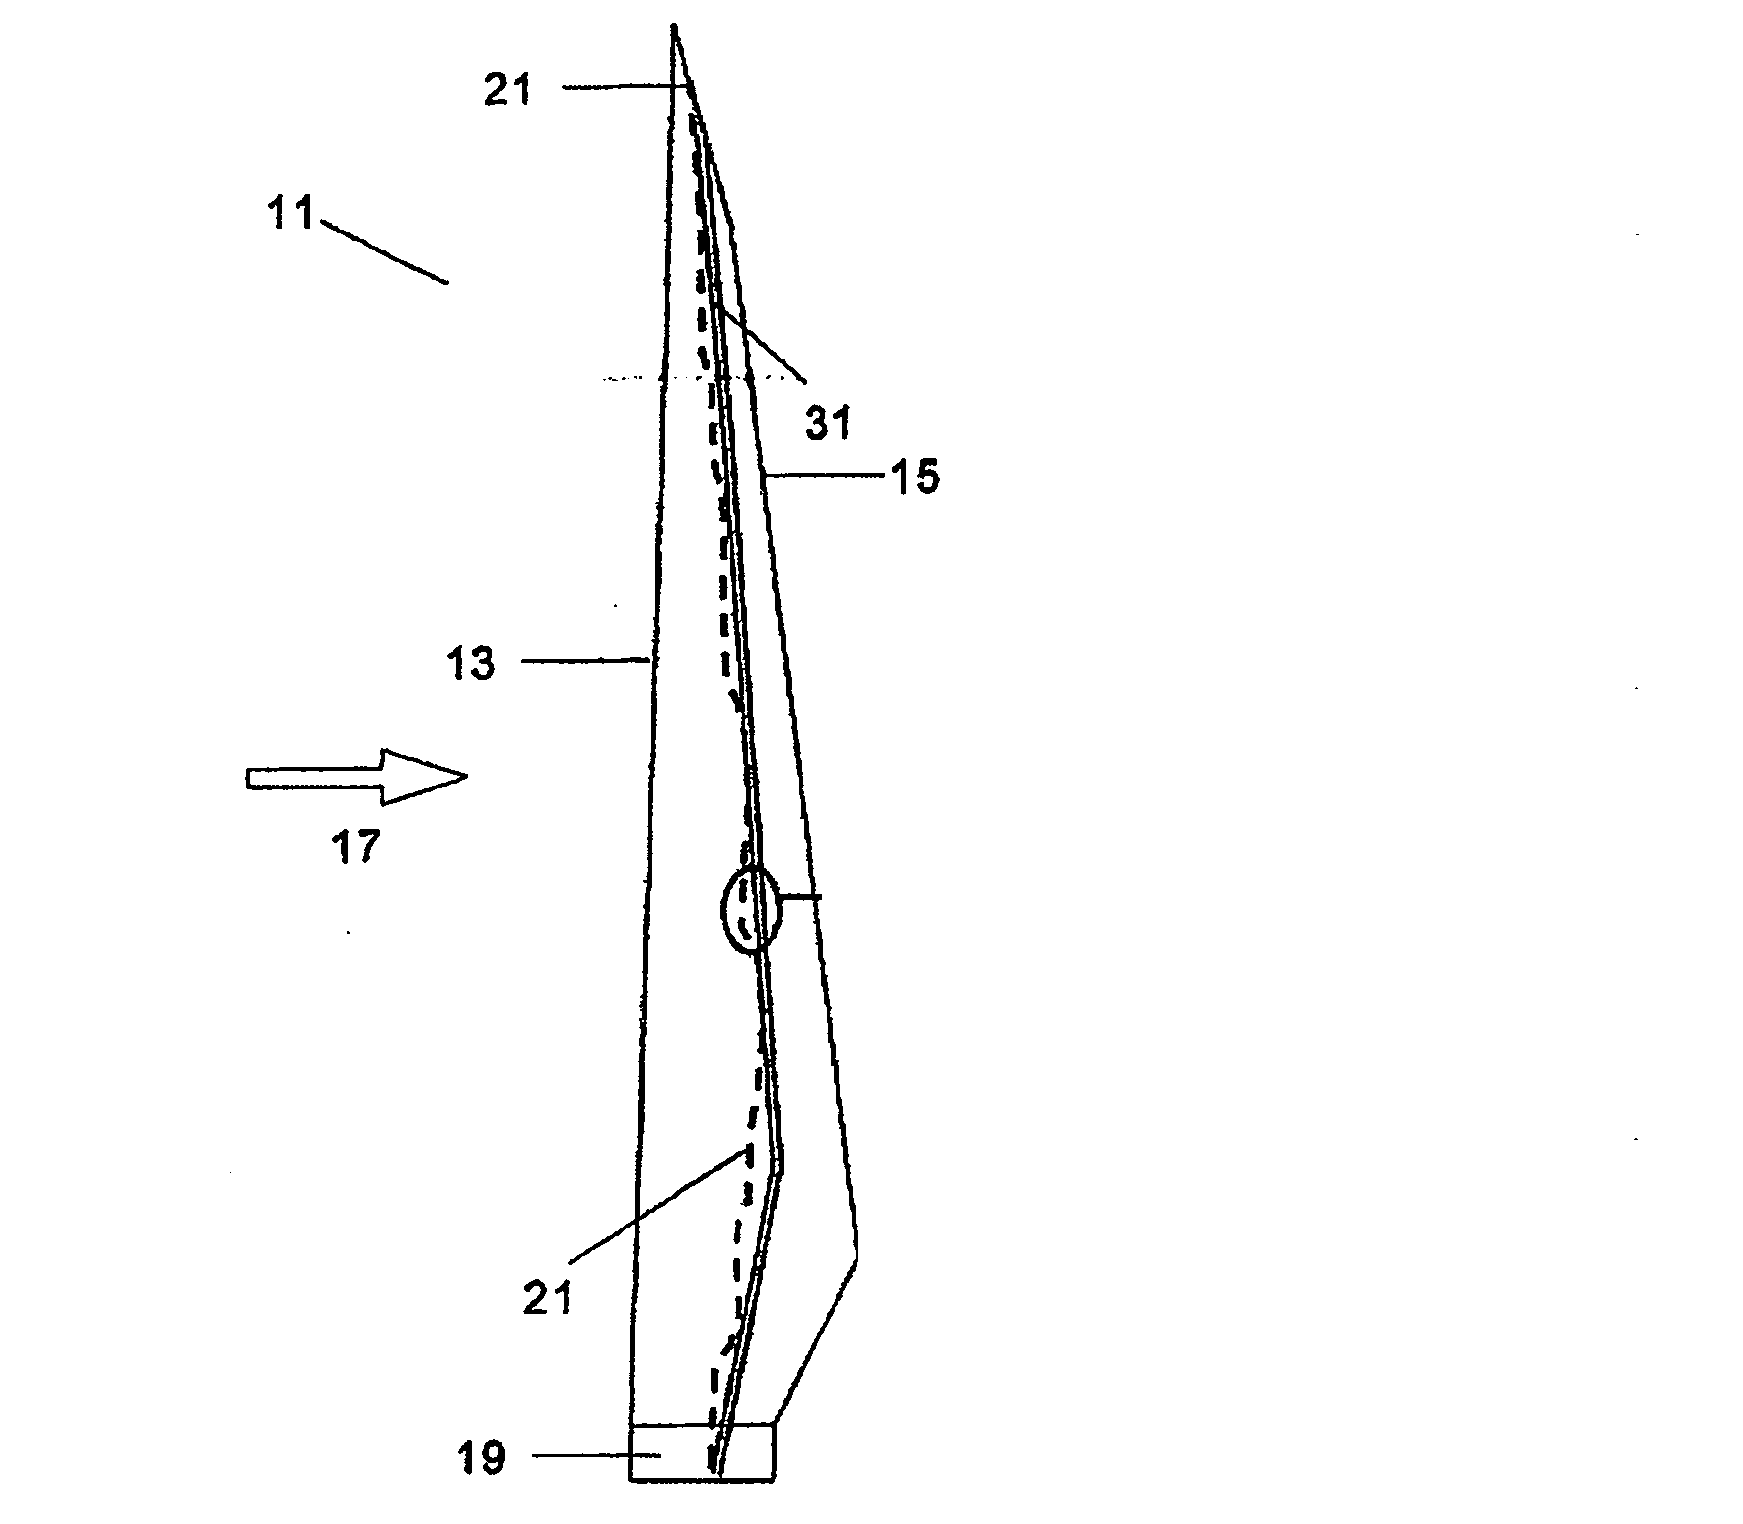 Wind turbine blade with anti-noise devices